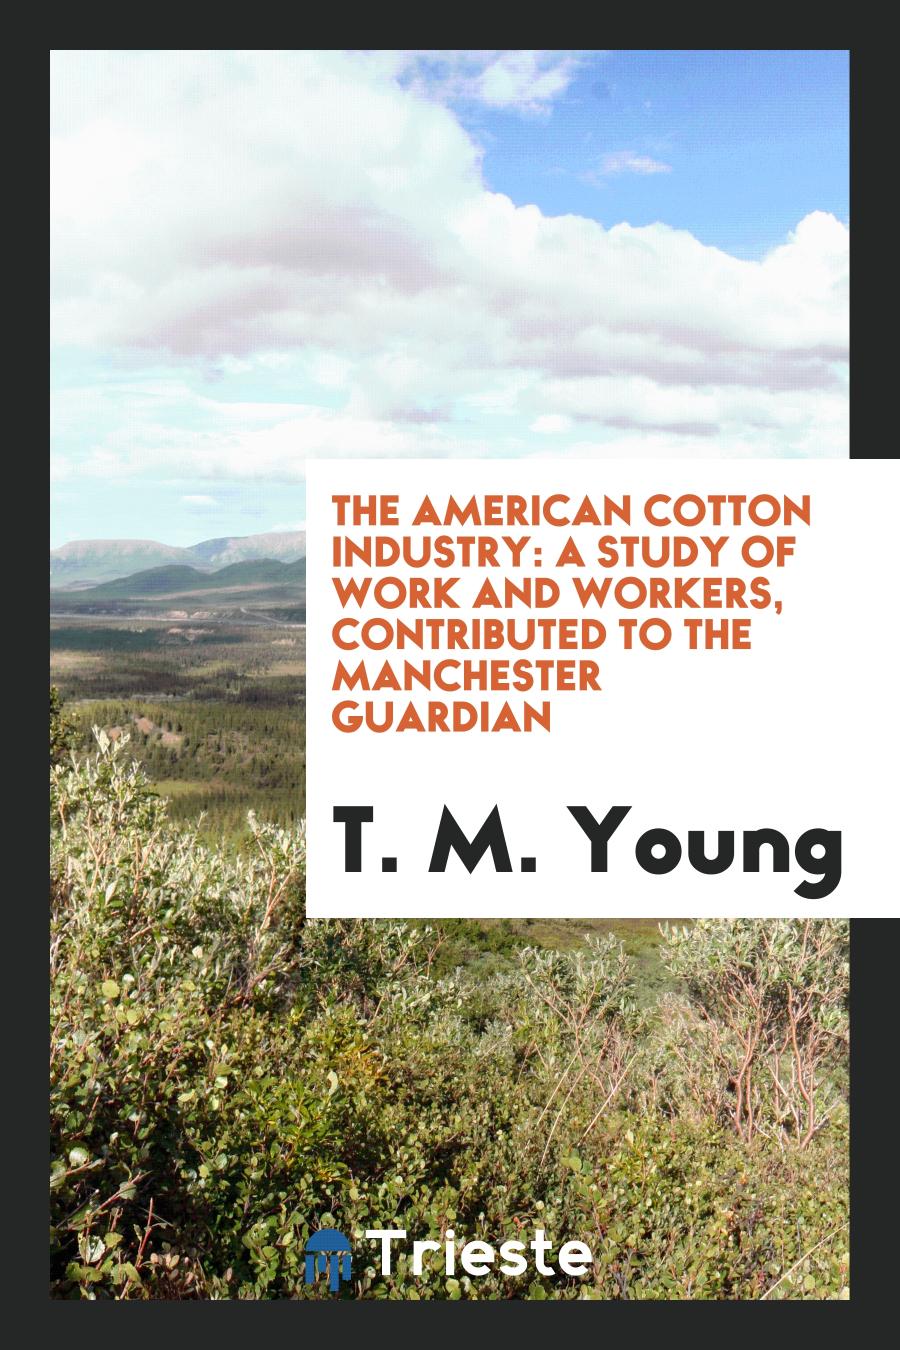 The American Cotton Industry: A Study of Work and Workers, Contributed to the Manchester Guardian